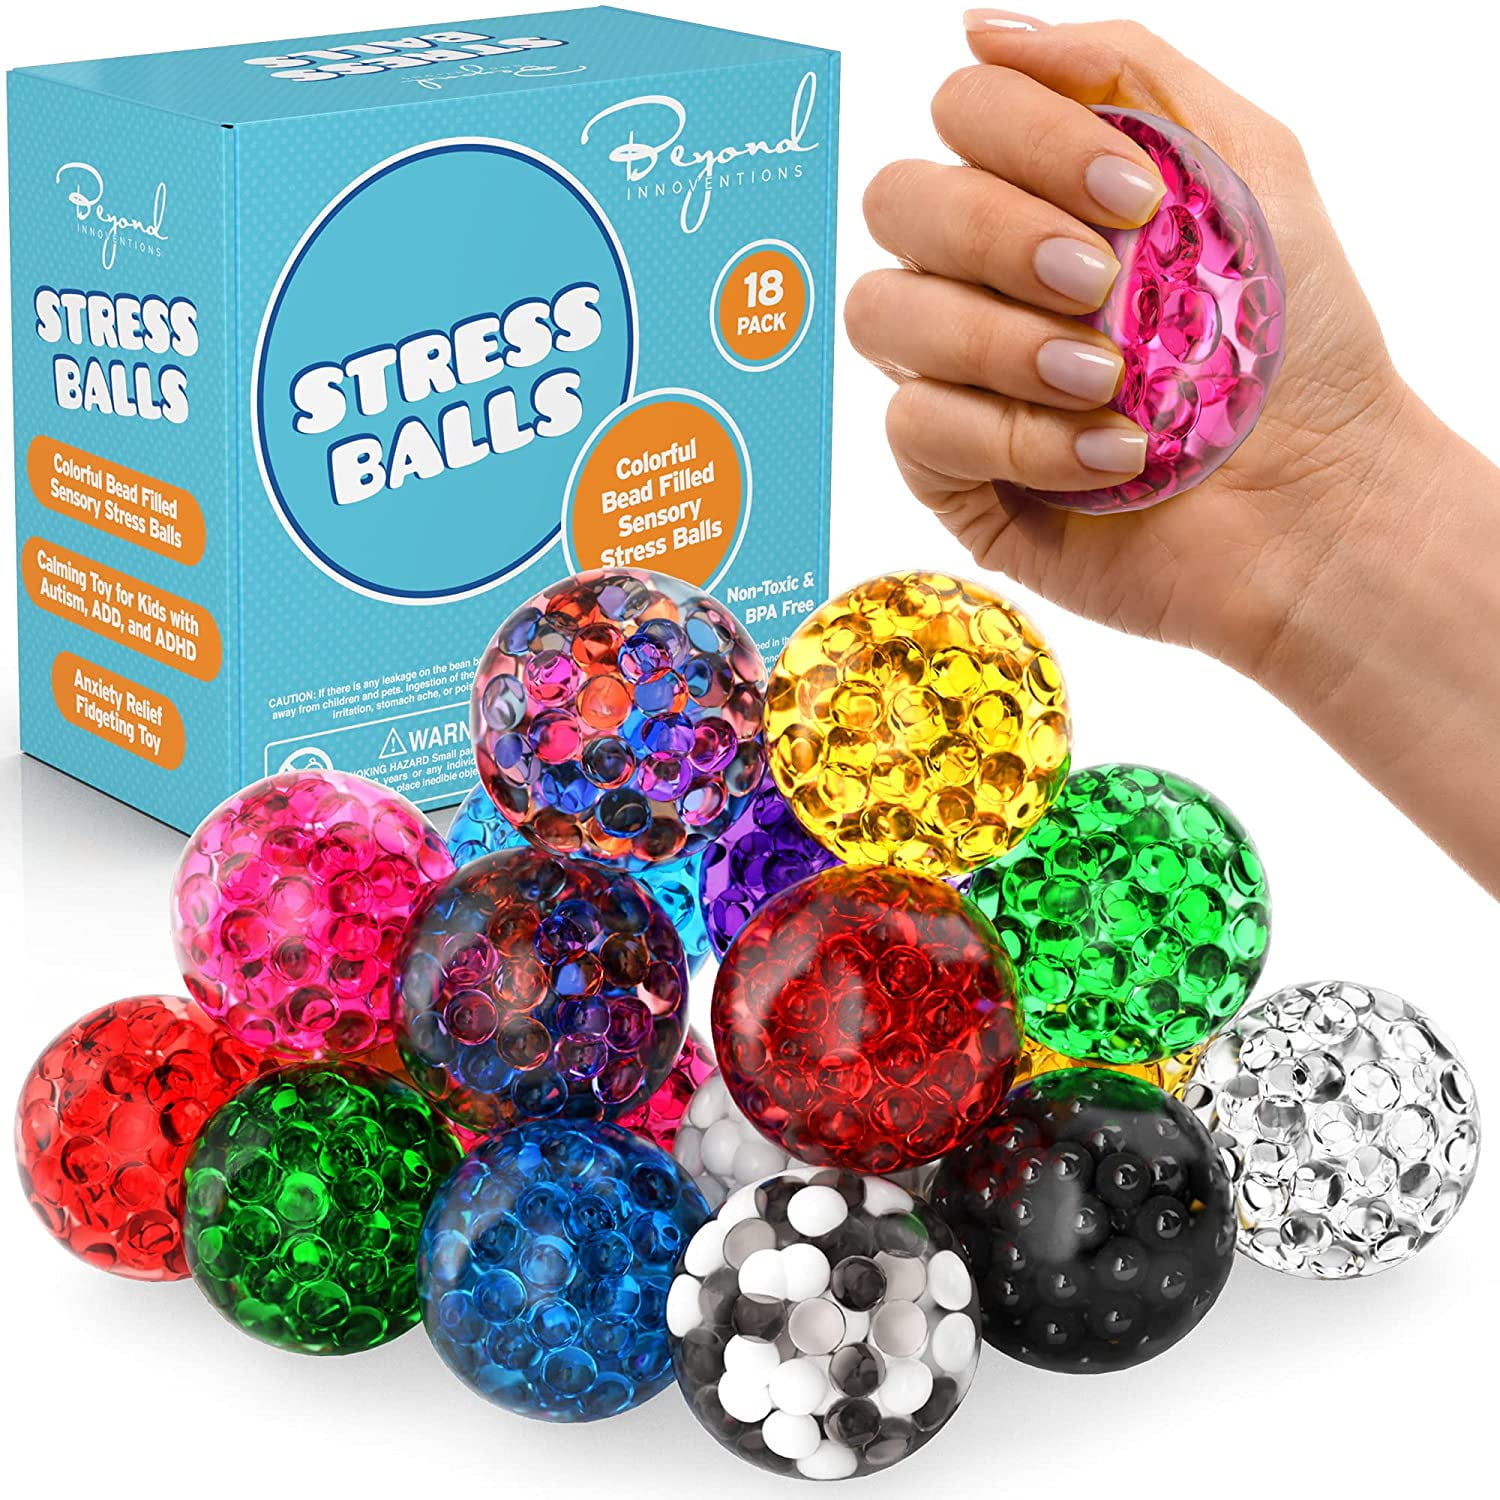 Stress Relief Fidget Toy for Adults ADHD 6 Sides Multiple Ways Fidget Cube Premium Quality Anxiety Relief Items Honcr Fidget Cube Stress Relief Toy